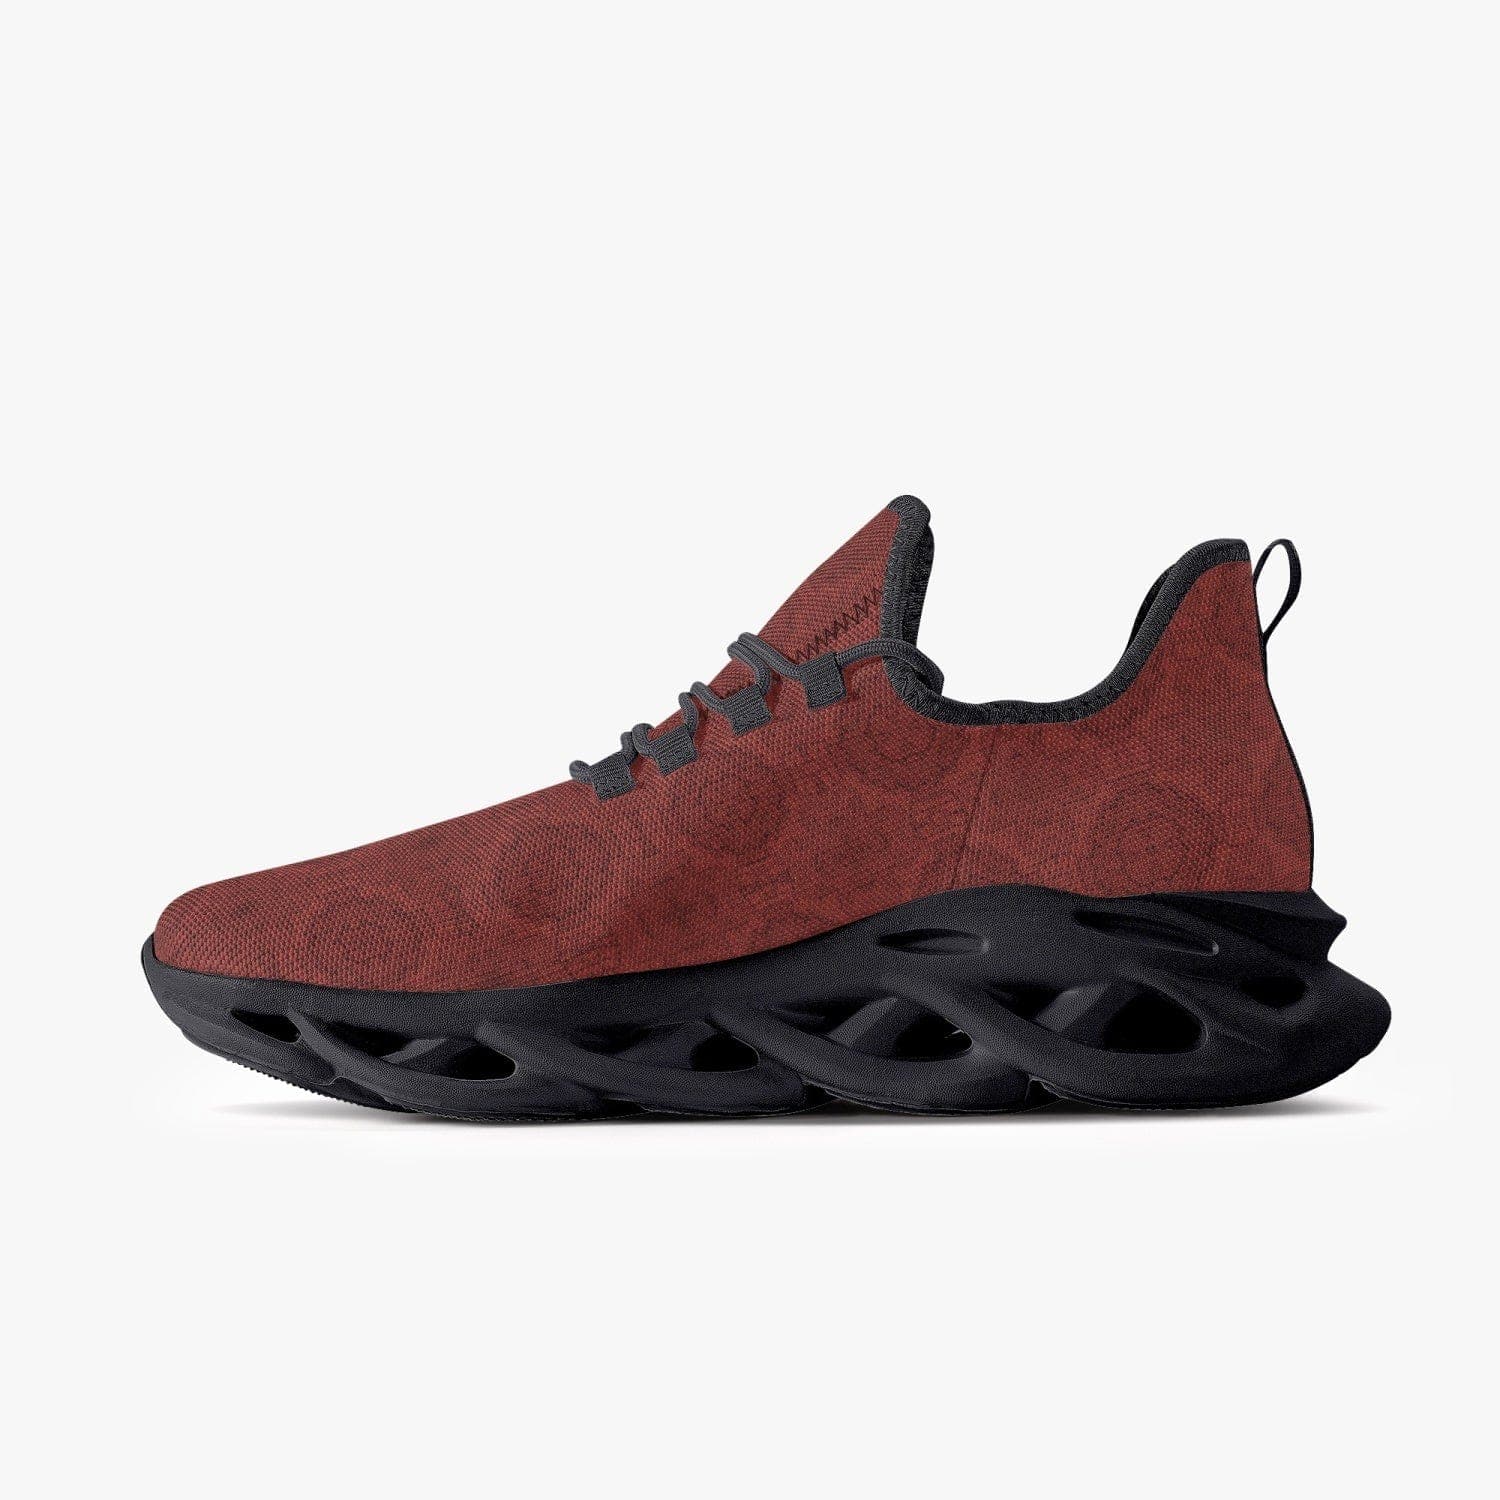 Red Durable Responsive Bounce Laced Mesh Soft Knit Sneakers for Men and Women with Arch Support, designed by Sensus Studio Design